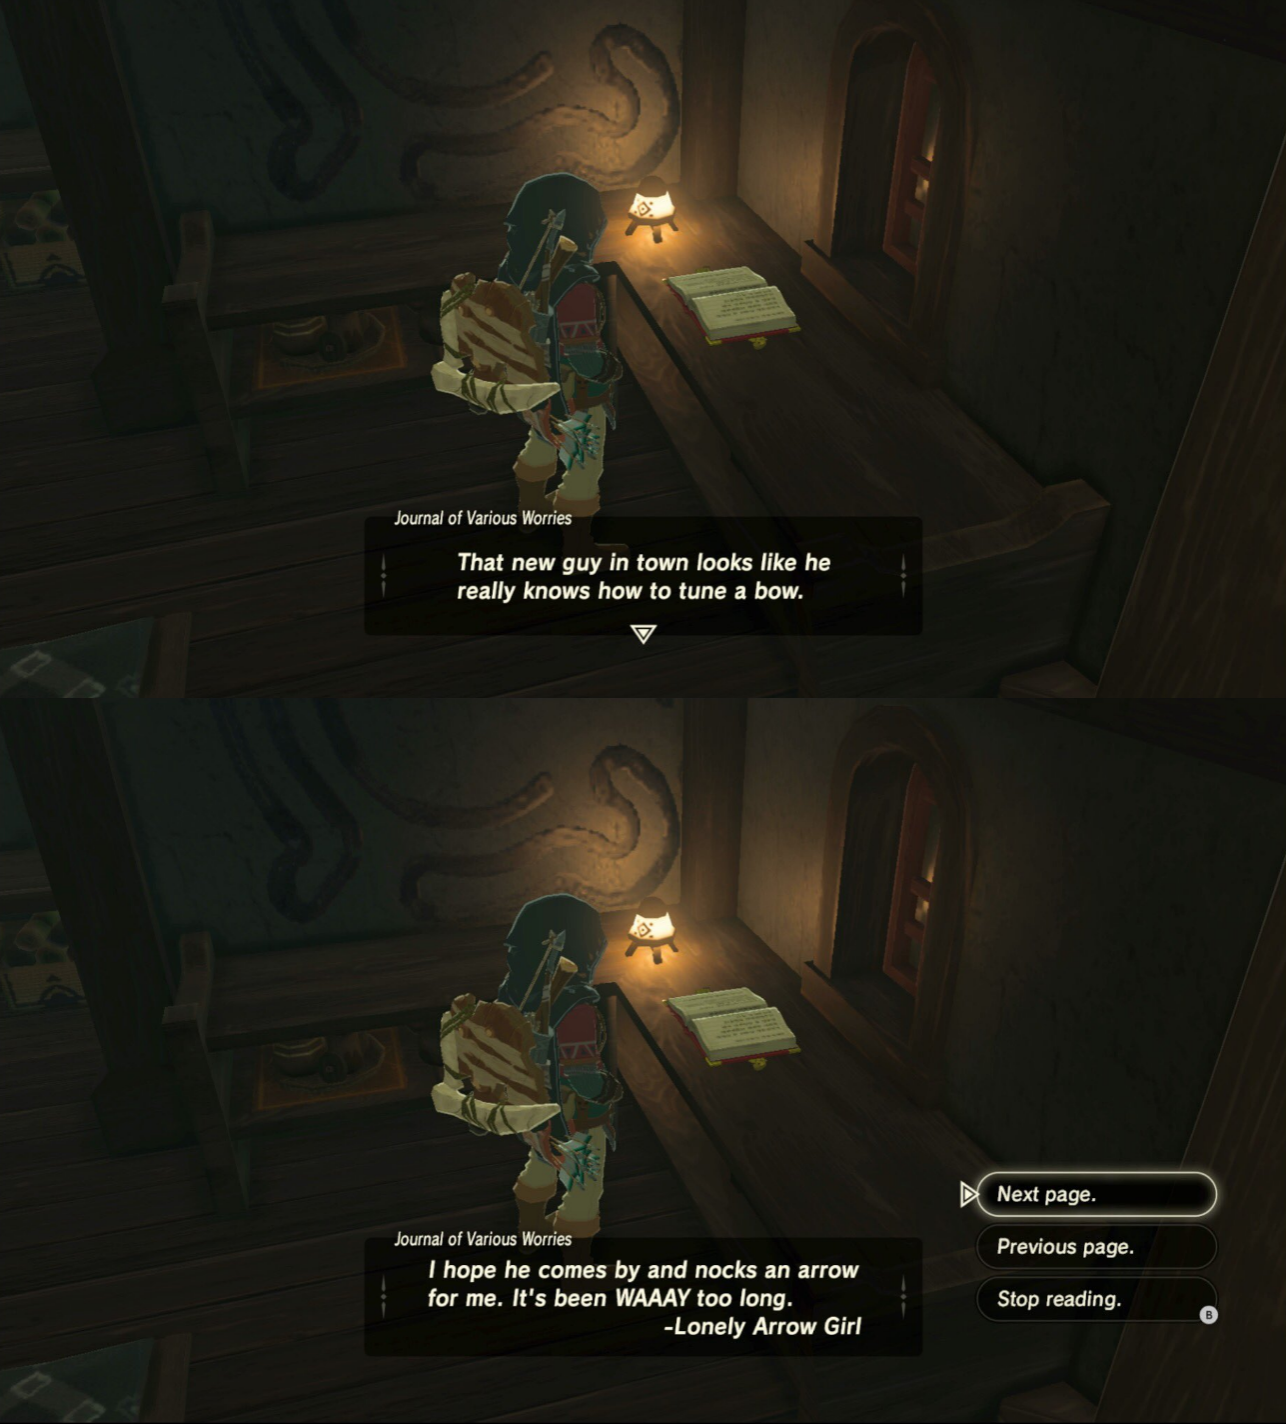 tloz botw sex - of various That new guy in town looks he really knows how to tune a bow Next page. Previous page. Jouw of various Word I hope he comes by and nocks an arrow for me. It's been Walay too long Lonely Arrow Girl Stop reading